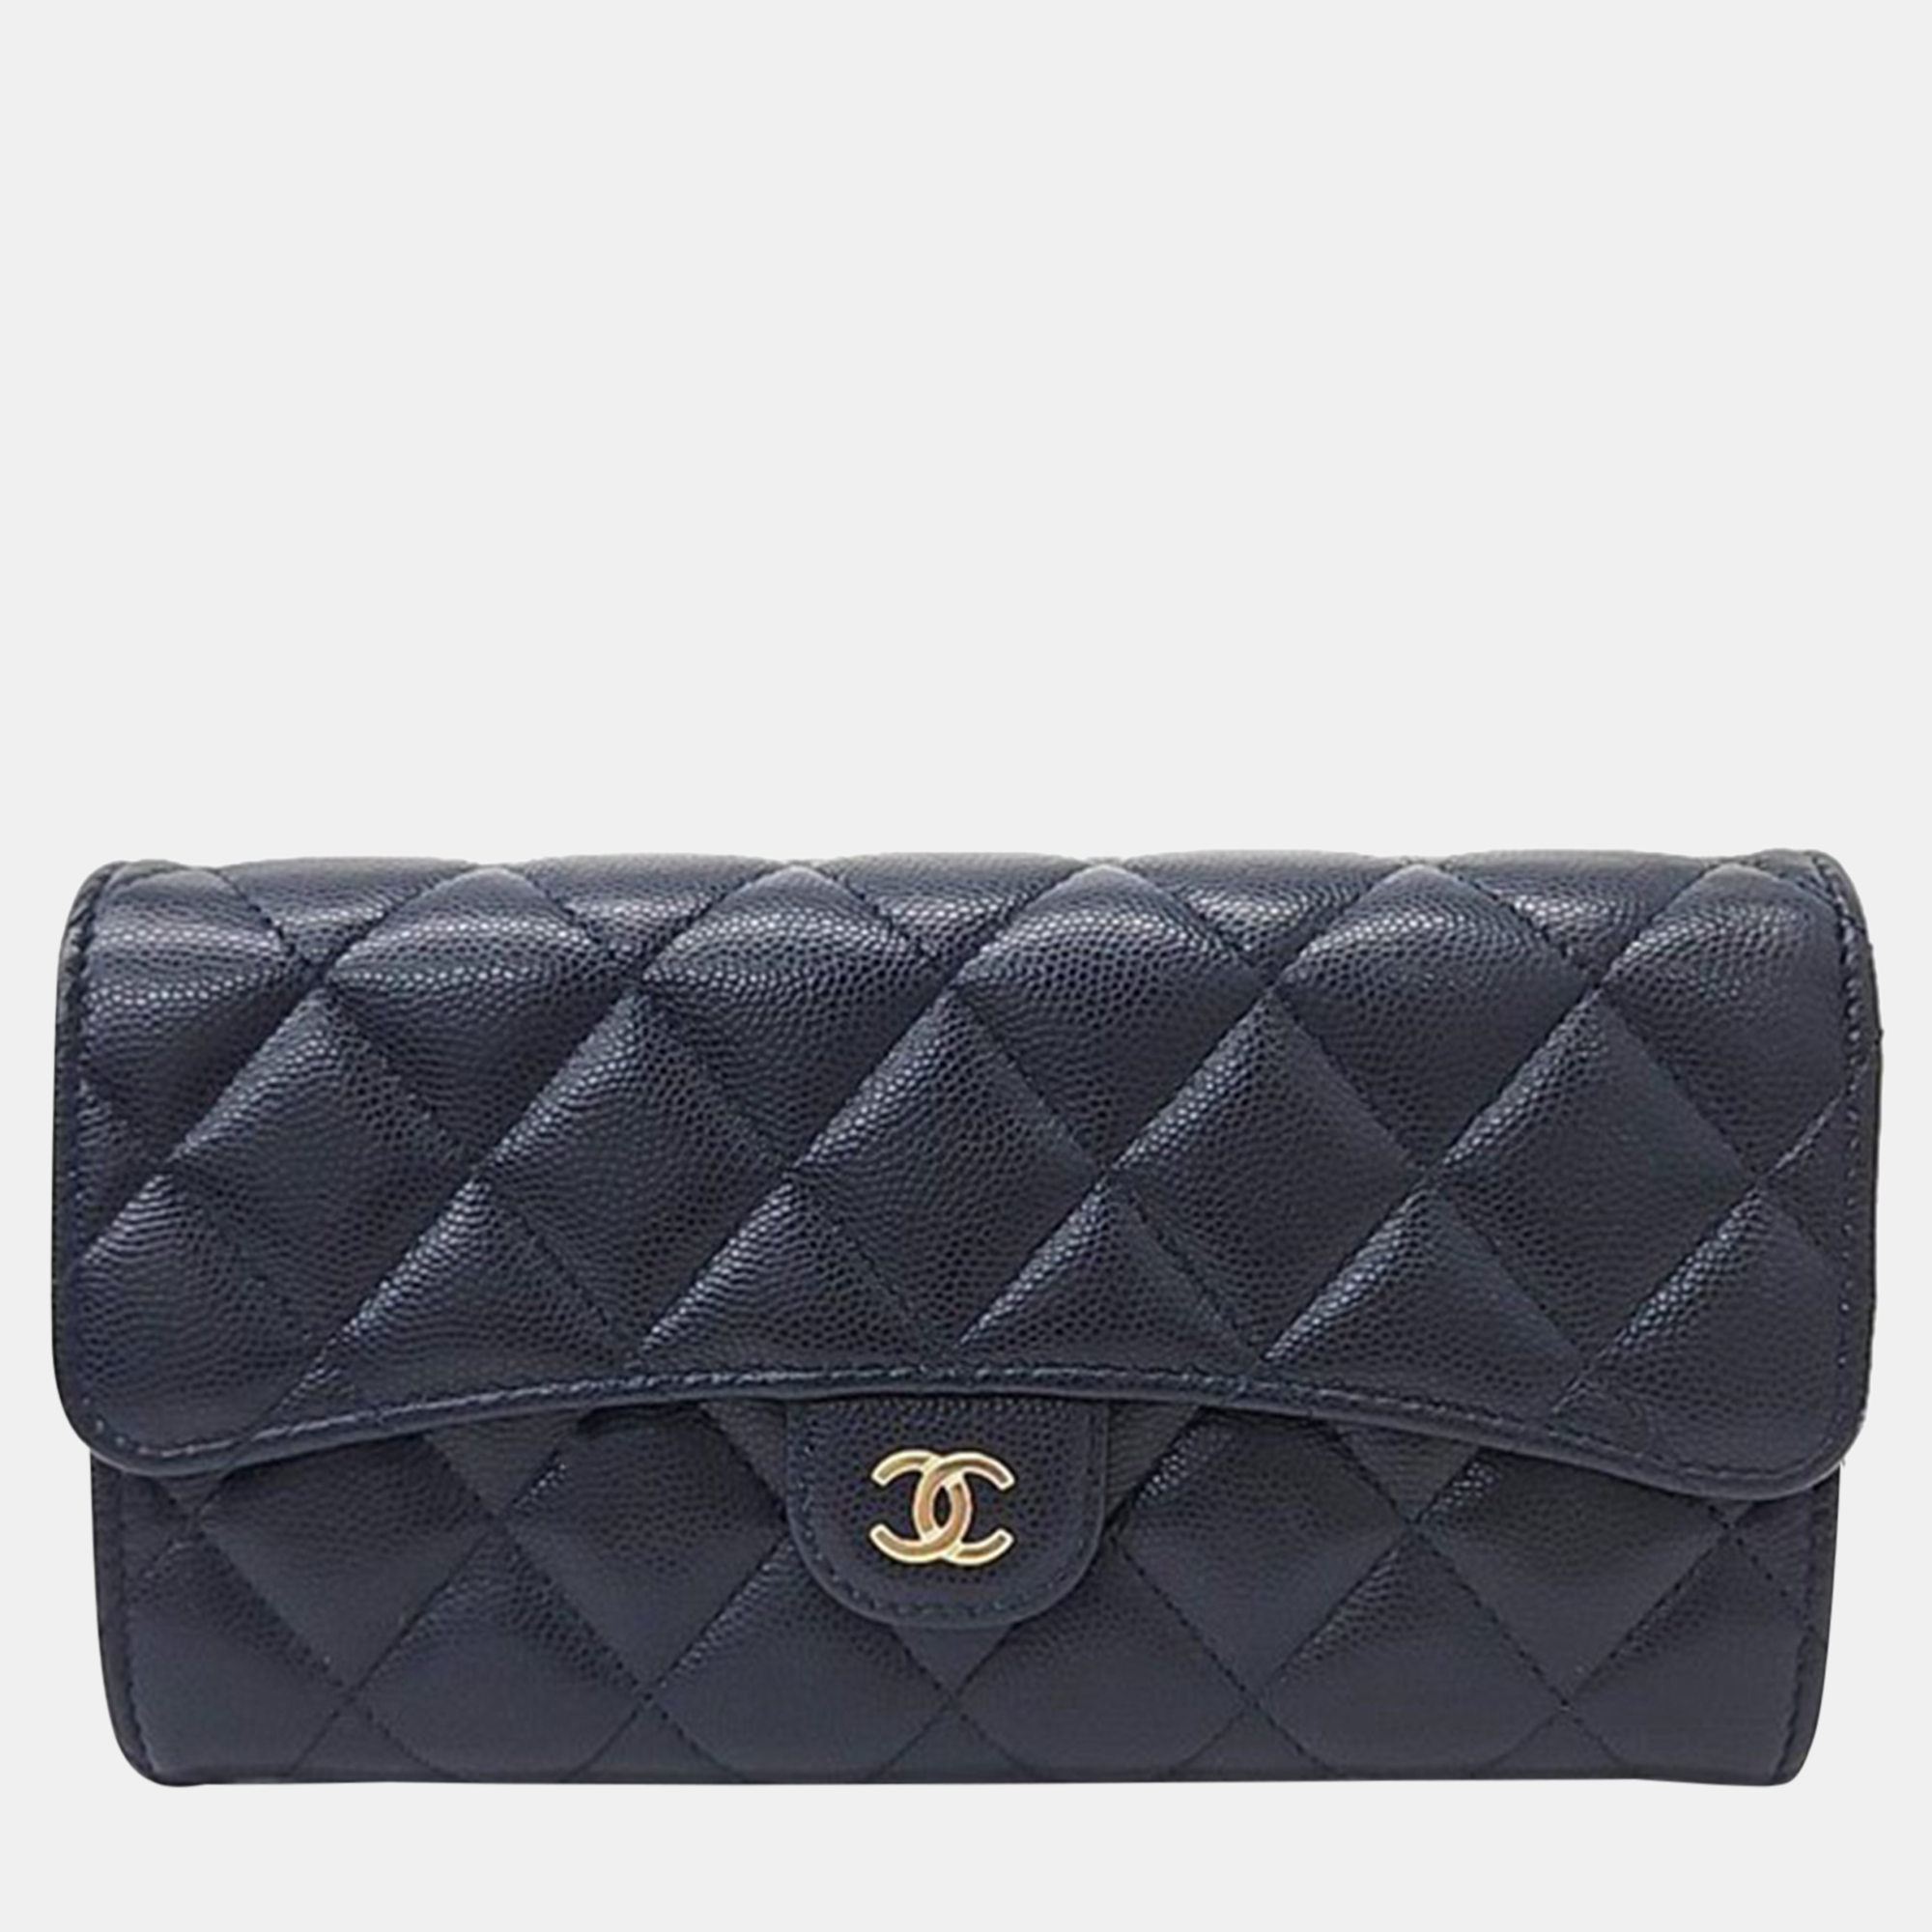 Chanel navy blue caviar leather long wallet